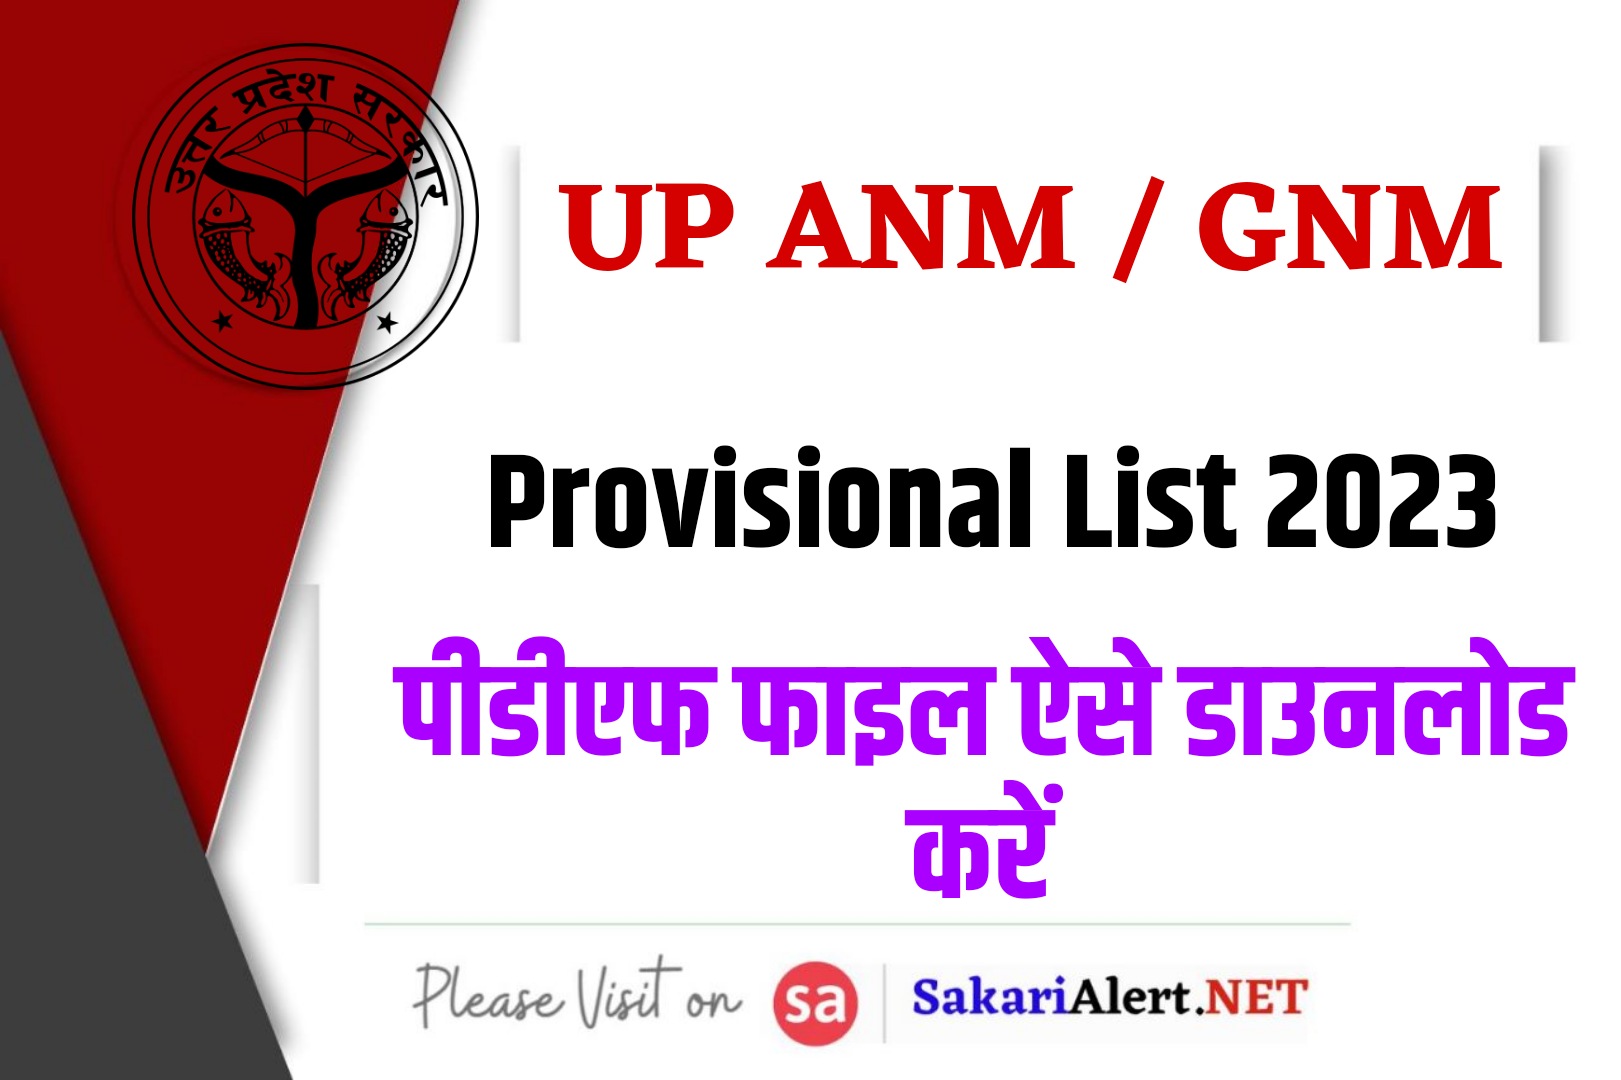 UP ANM / GNM Provisional List 2023